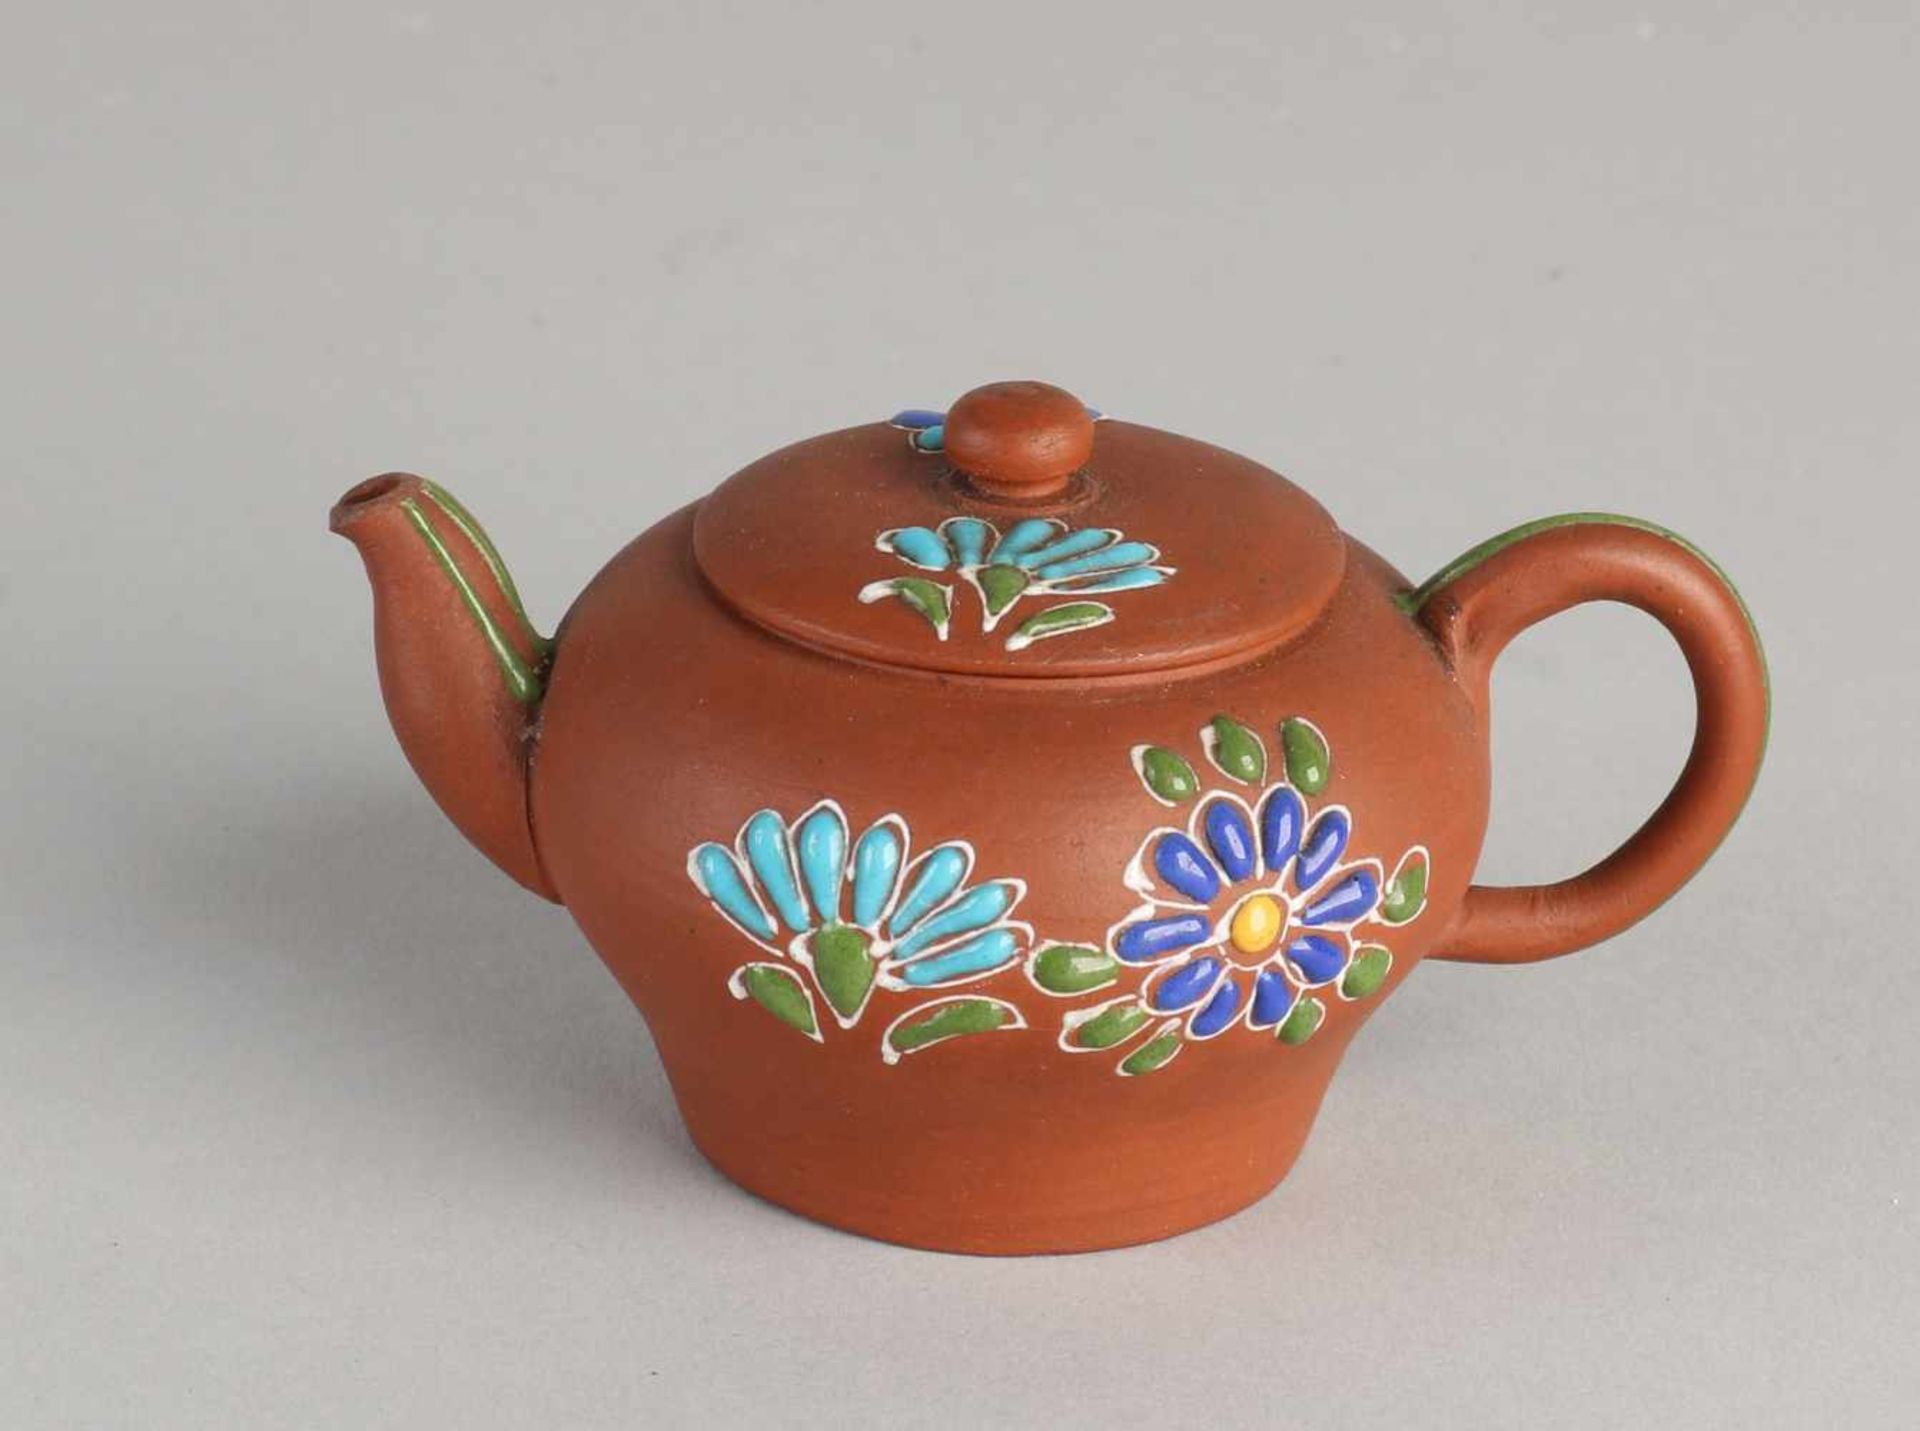 Small Chinese Yixing teapot with floral enamel decoration. Without bottom mark. Size: 4.5 x 9 x 5.